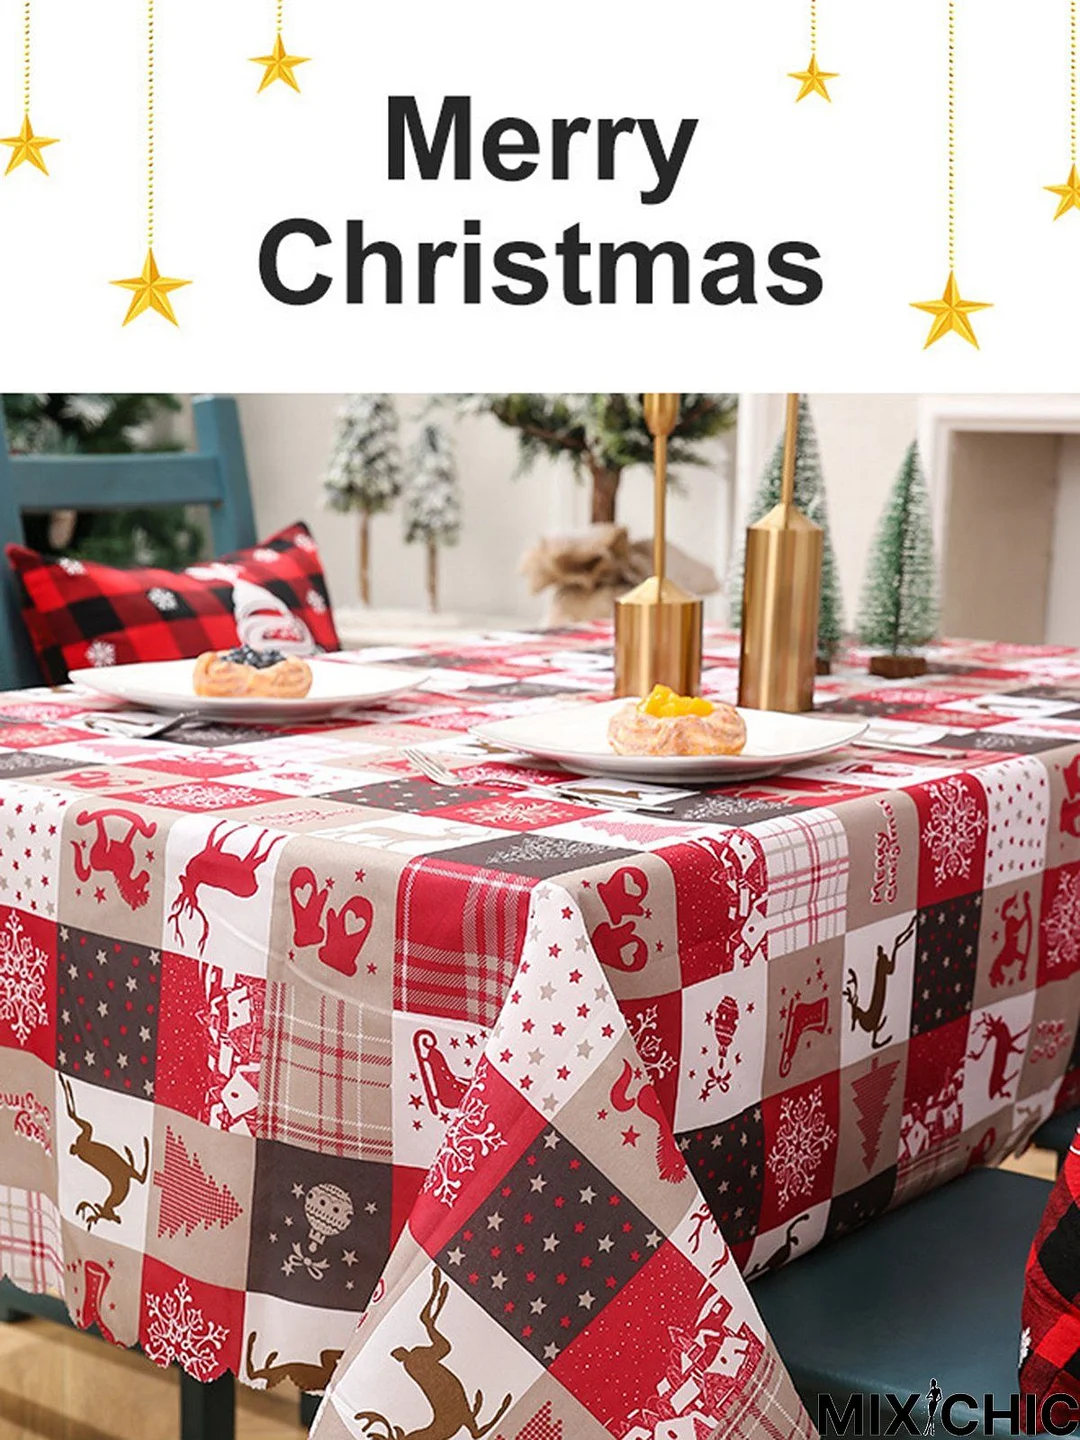 Creative Christmas Printed Tablecloths Table Runners Party Decorations Xmas Decoration